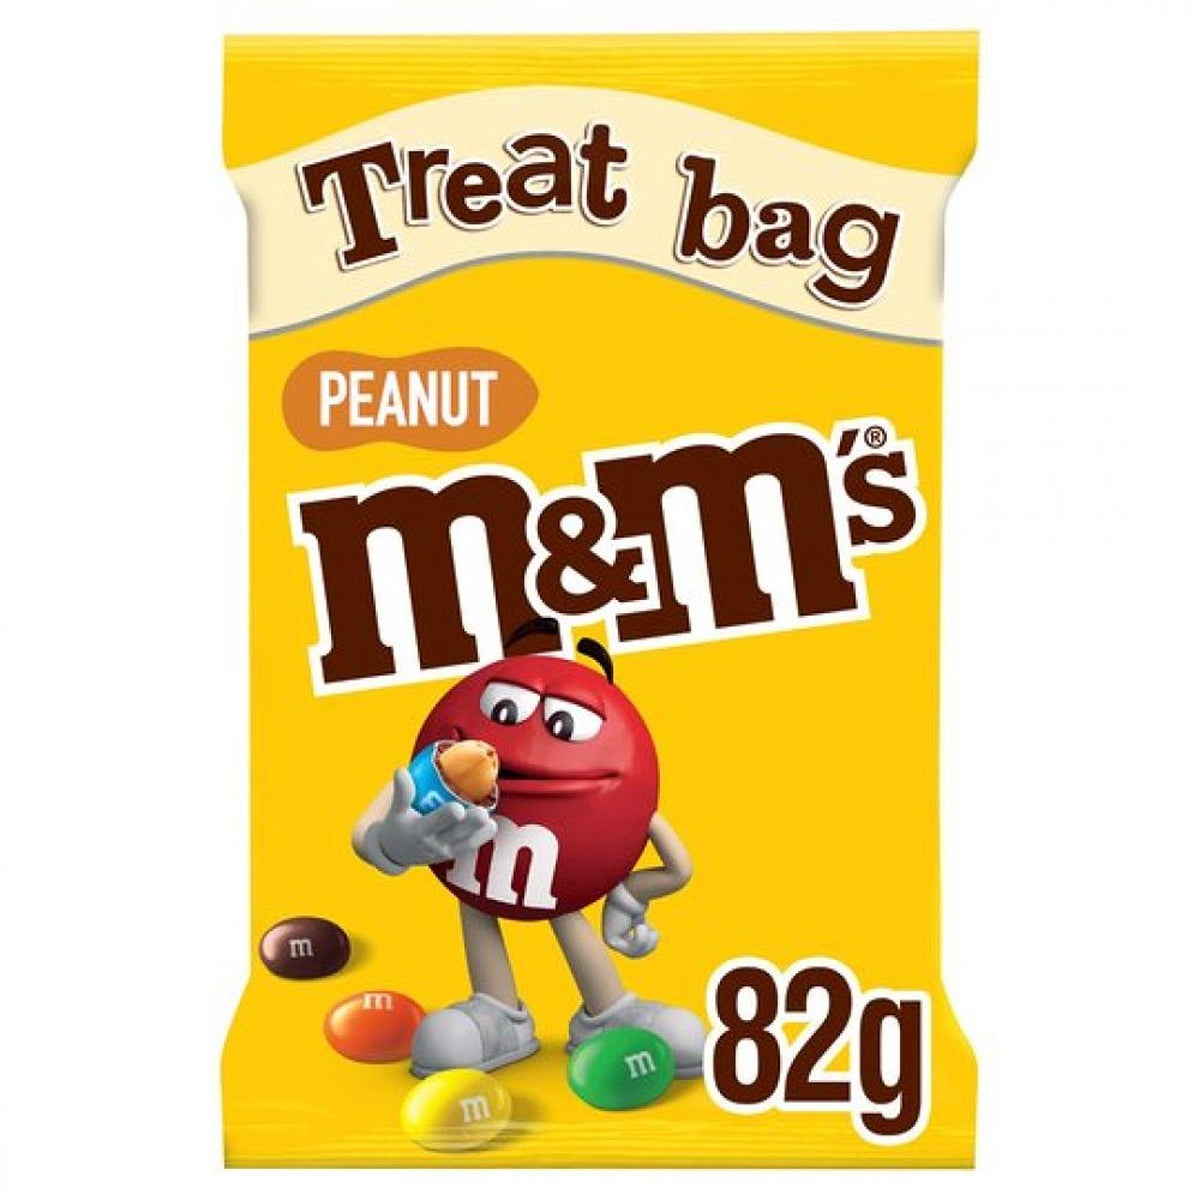 M&M's Peanut Chocolate More to Share Pouch Bag 268g